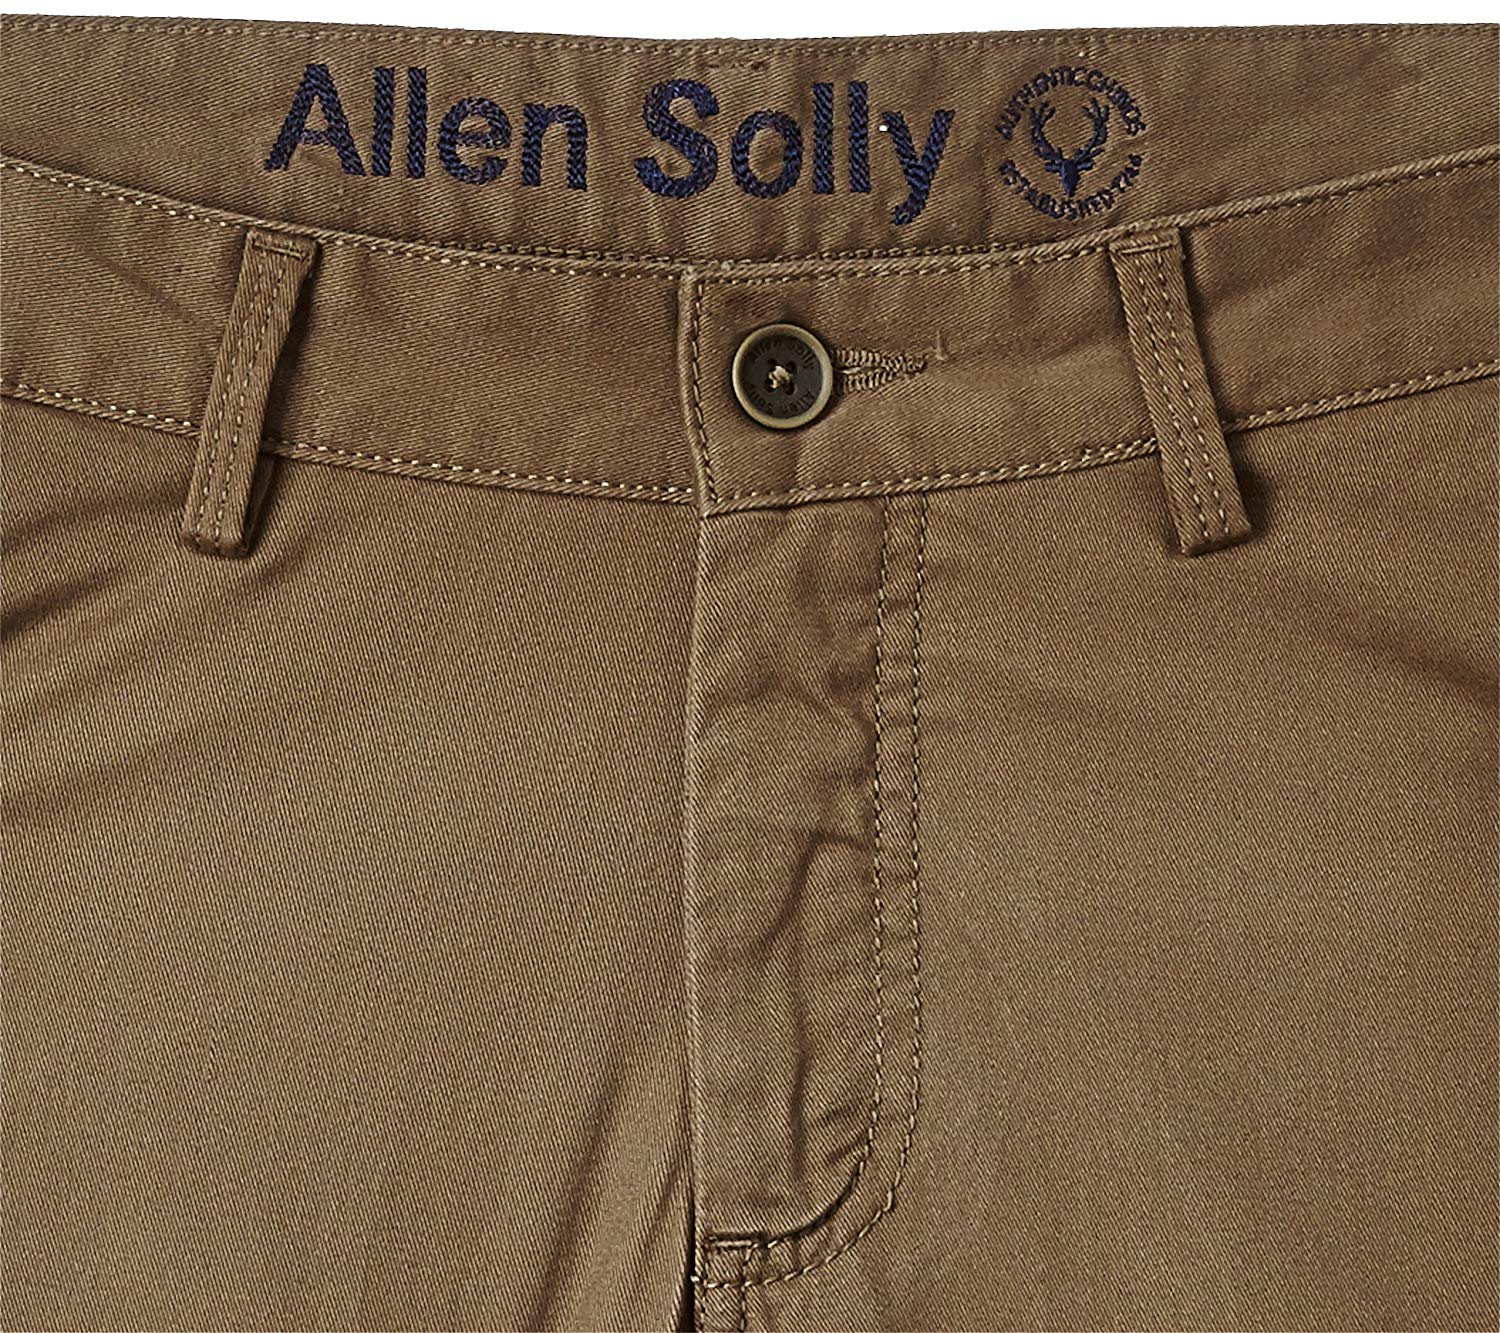 Allen Solly Solid Cotton Lycra Super Slim Fit Mens Trousers  (S21TFQULF992174001,Black,76) : Amazon.in: Clothing & Accessories